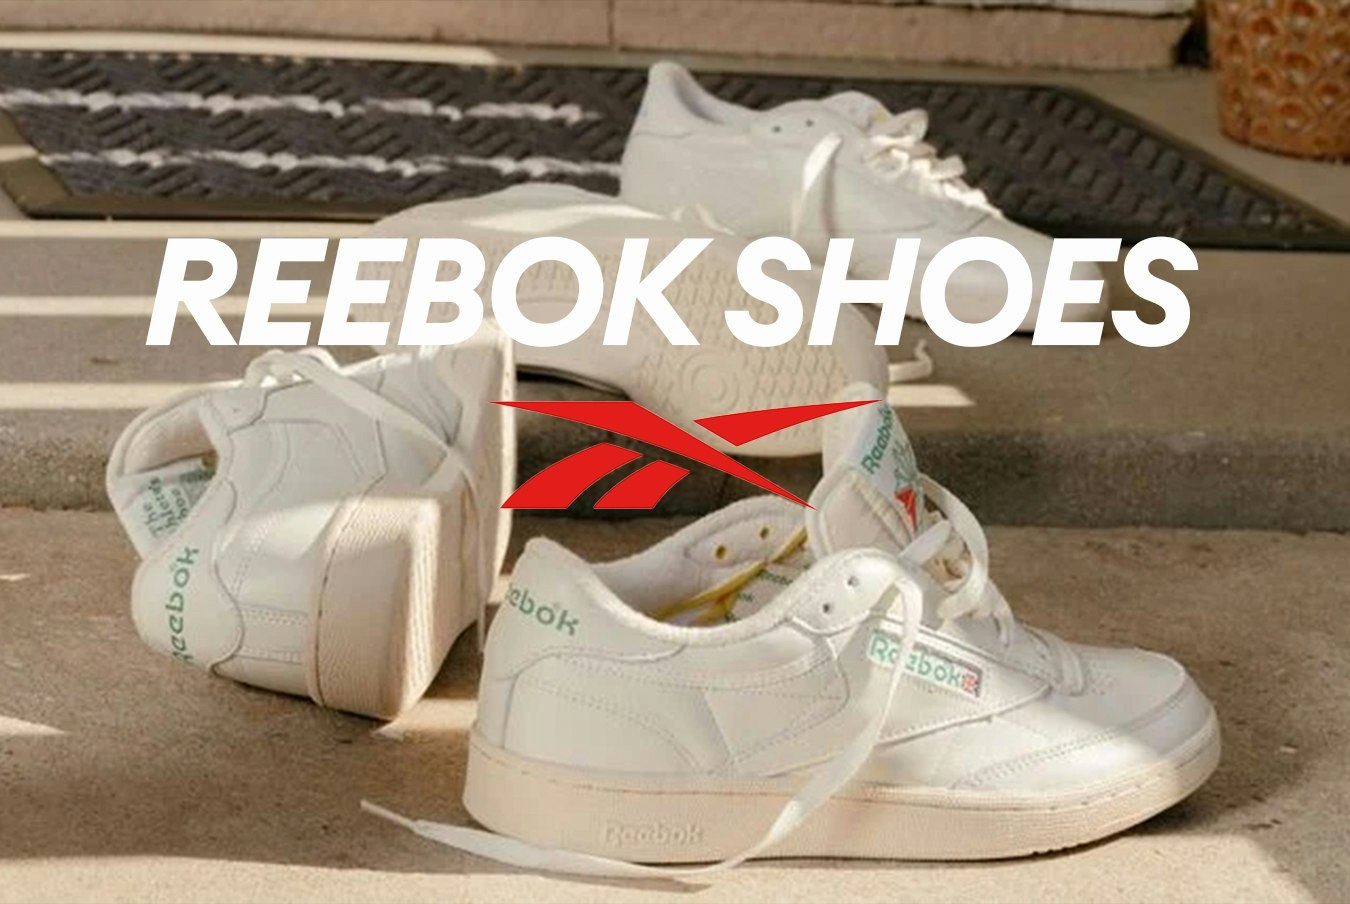 Reebok shoes now at Streetworld